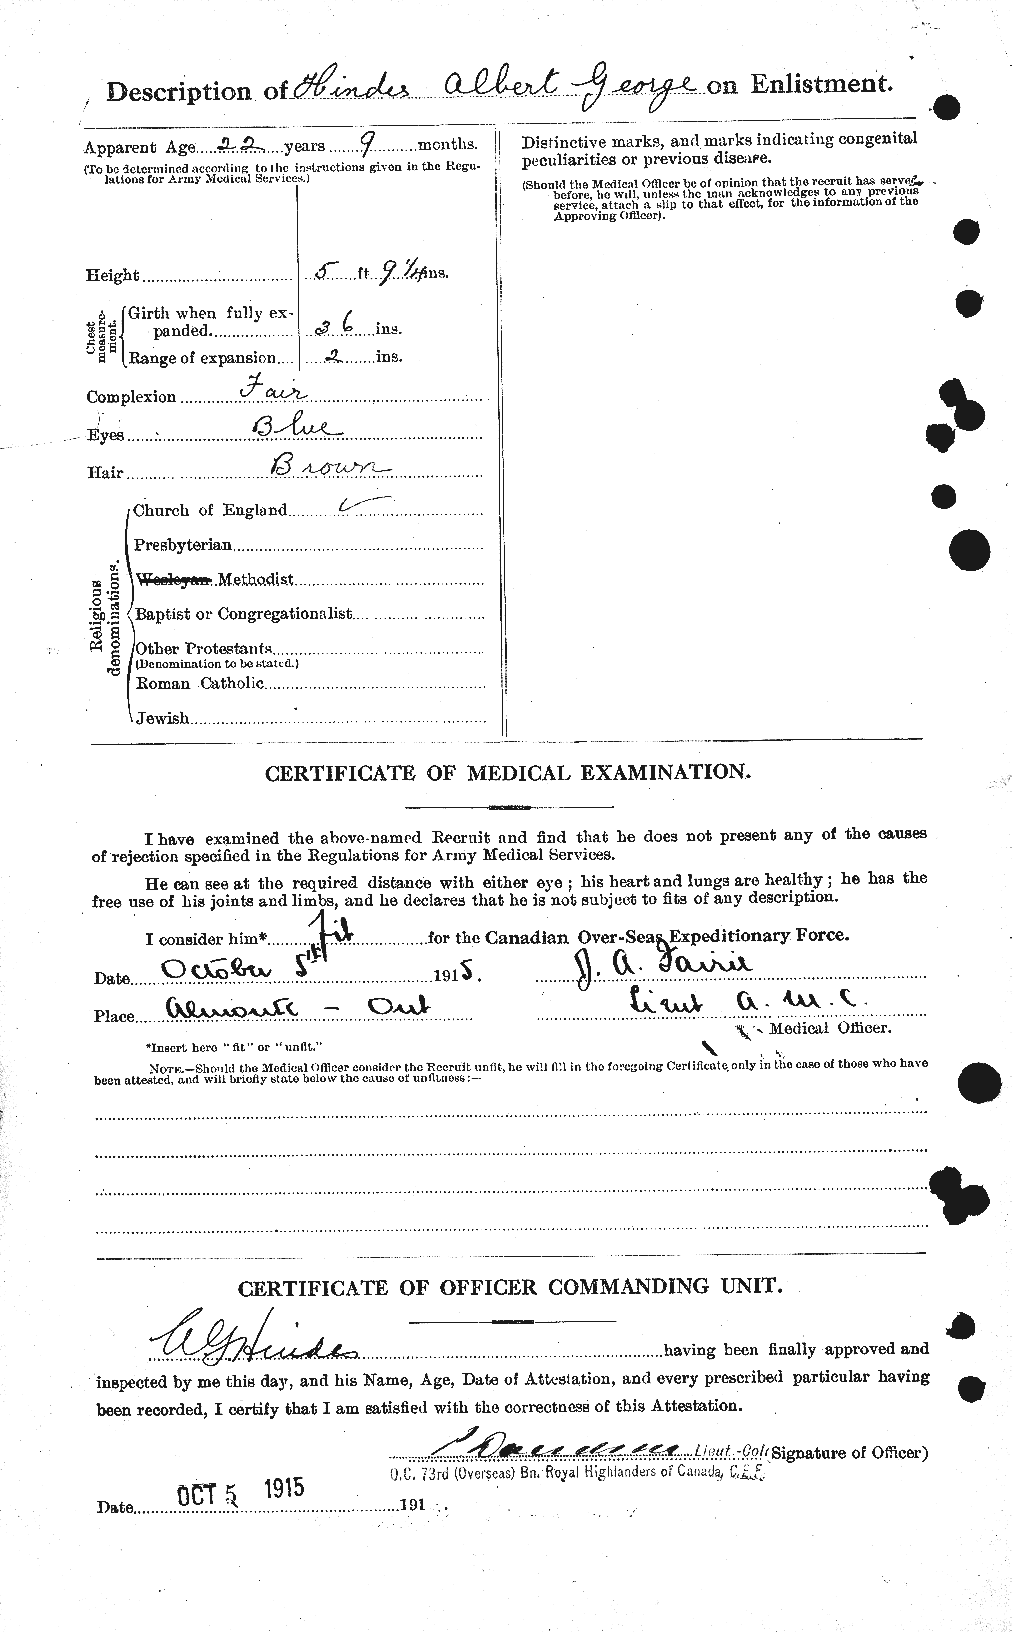 Personnel Records of the First World War - CEF 394309b